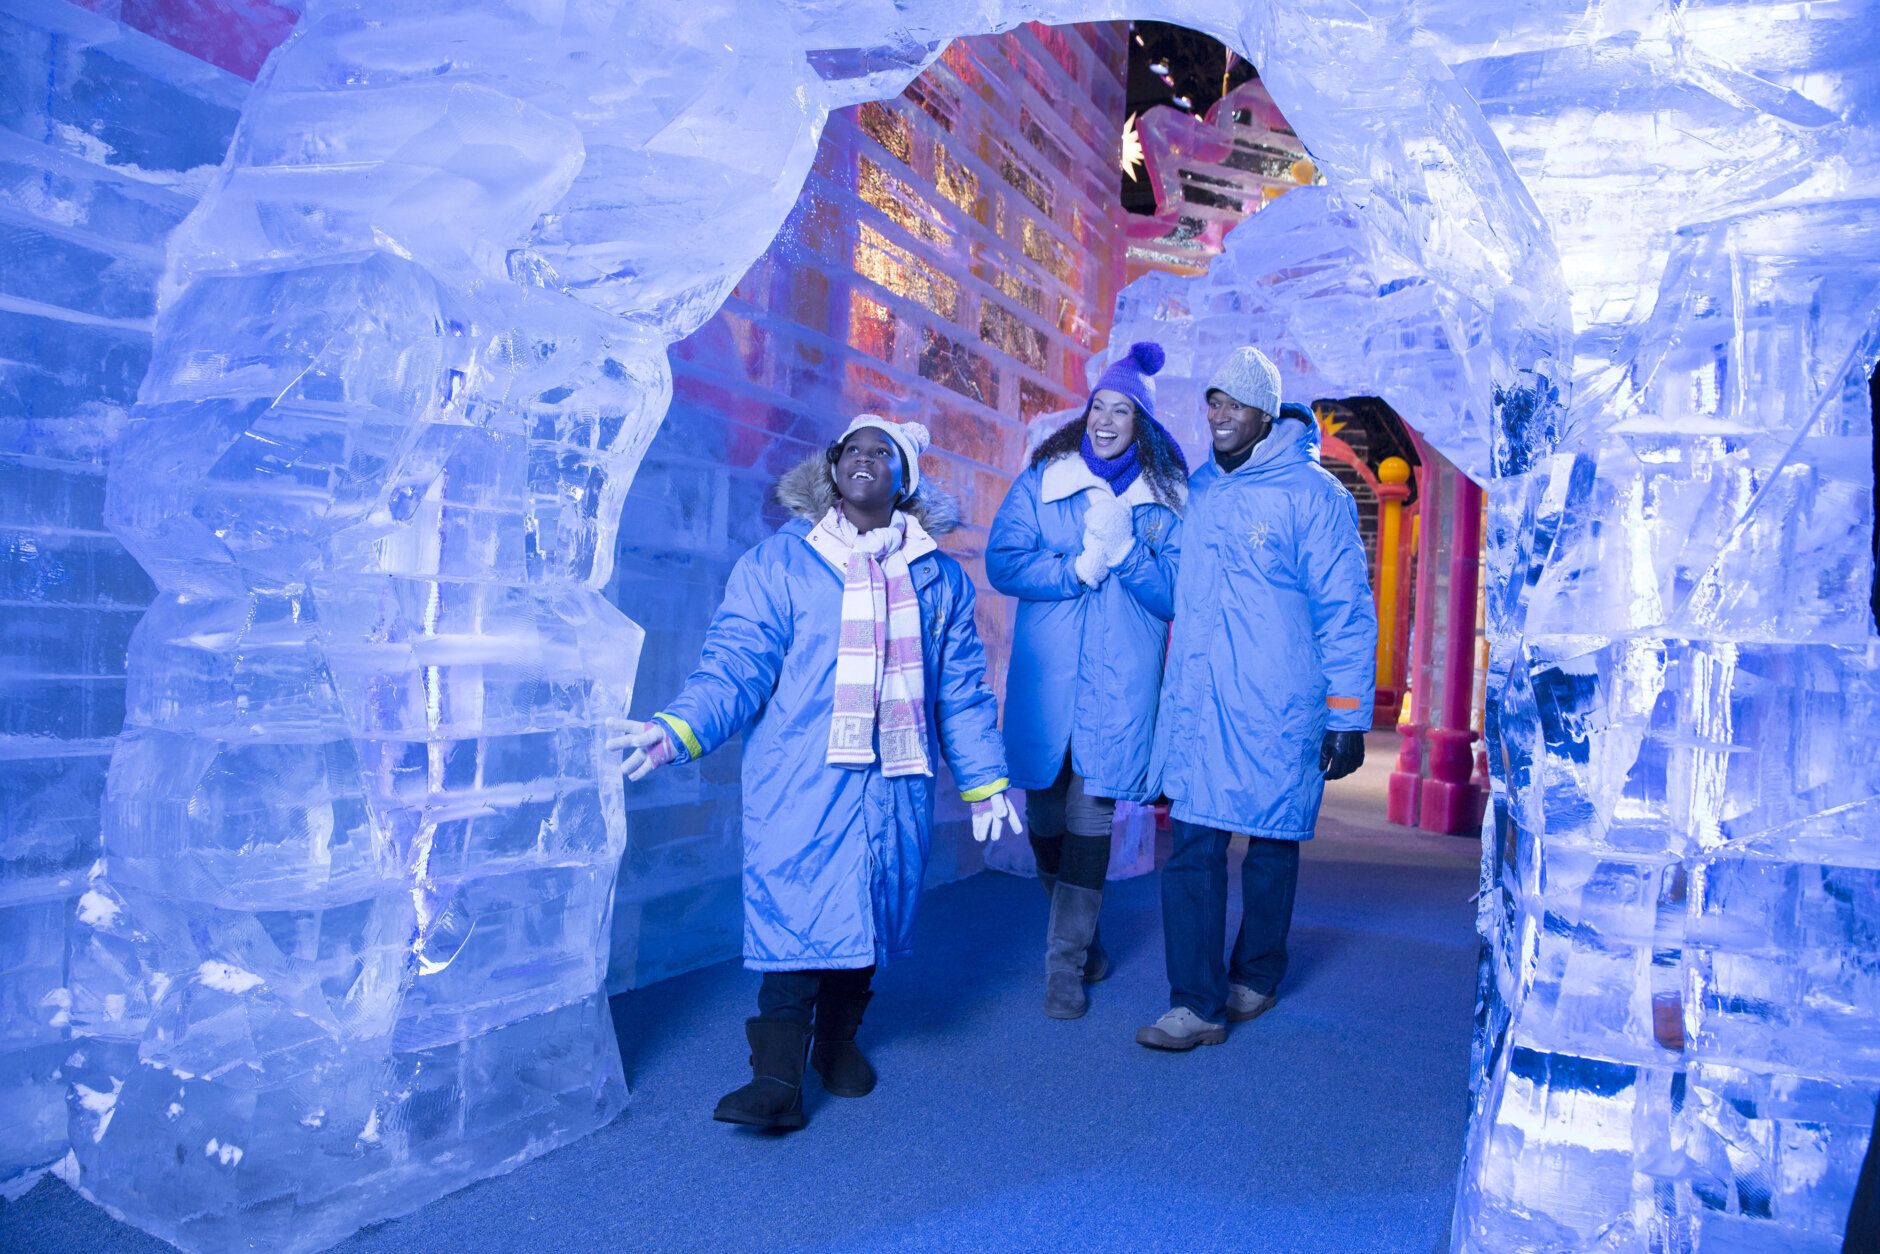 National Harbor’s Gaylord National Resort transforms into a Winter